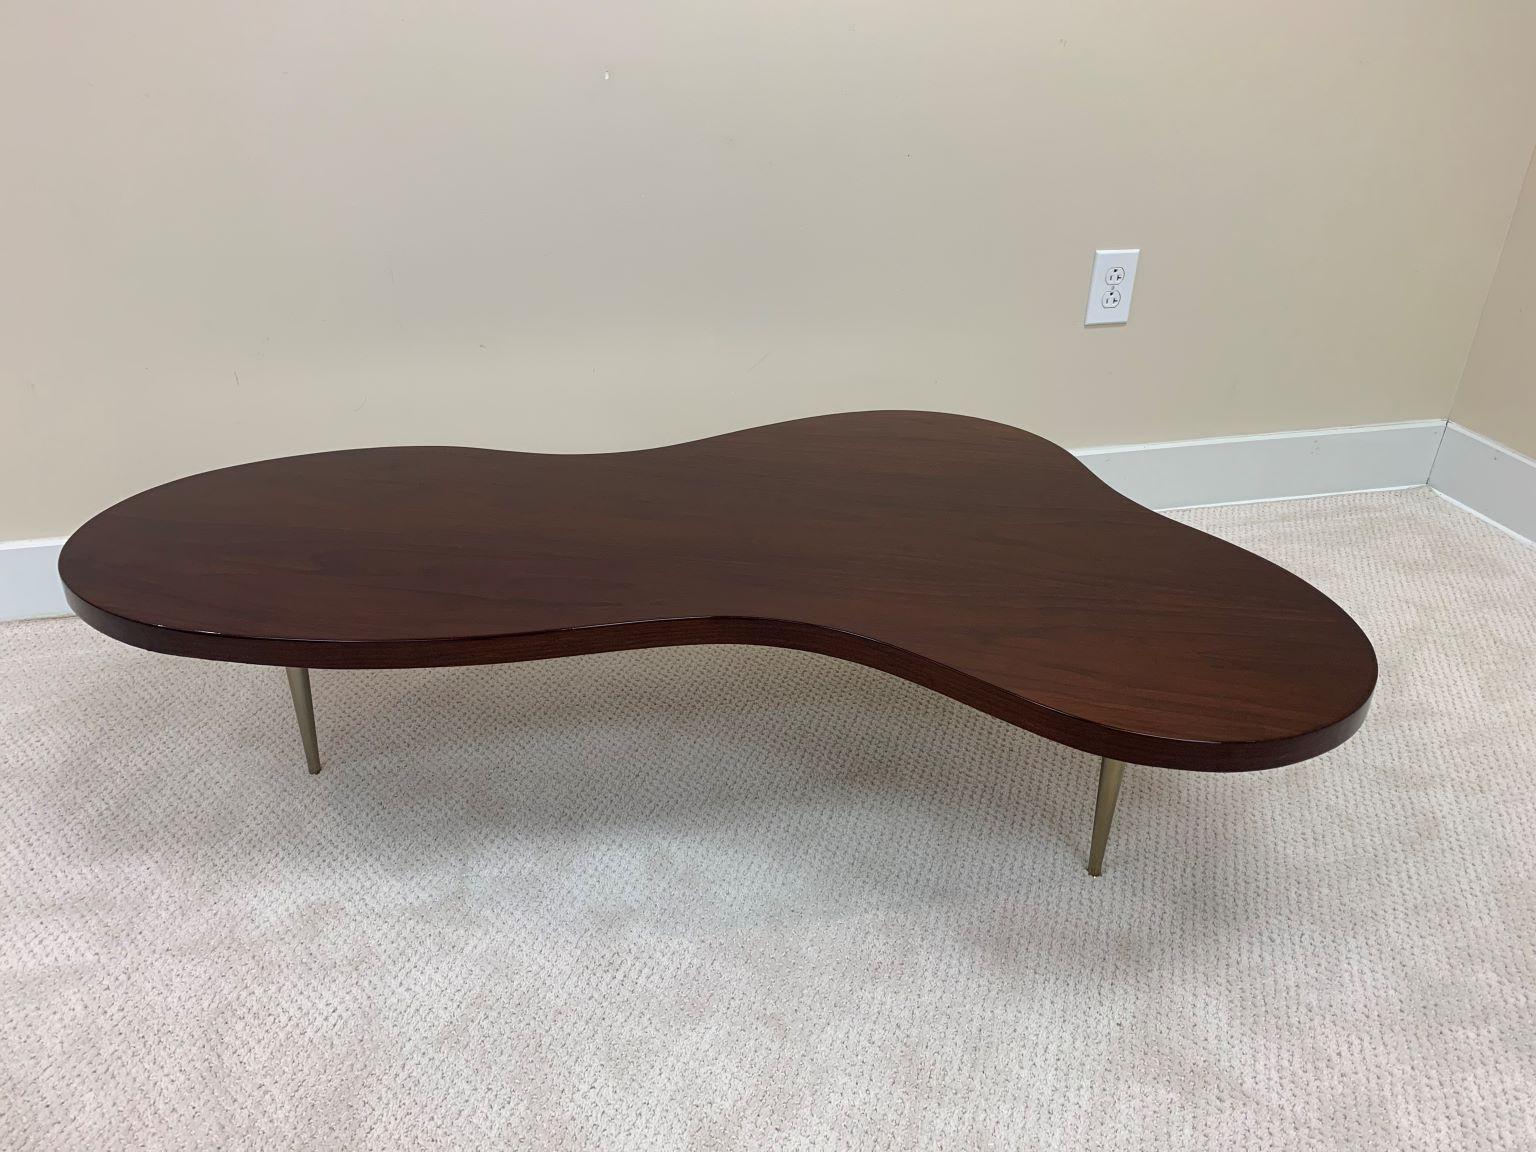 An iconic biomorphic cocktail table in walnut with tapered brass legs by T.H. Robsjohn-Gibbings. The design was produced by Widdicomb Furniture, original label can be found on the underside of the table. Beautifully restored in a gloss finish with